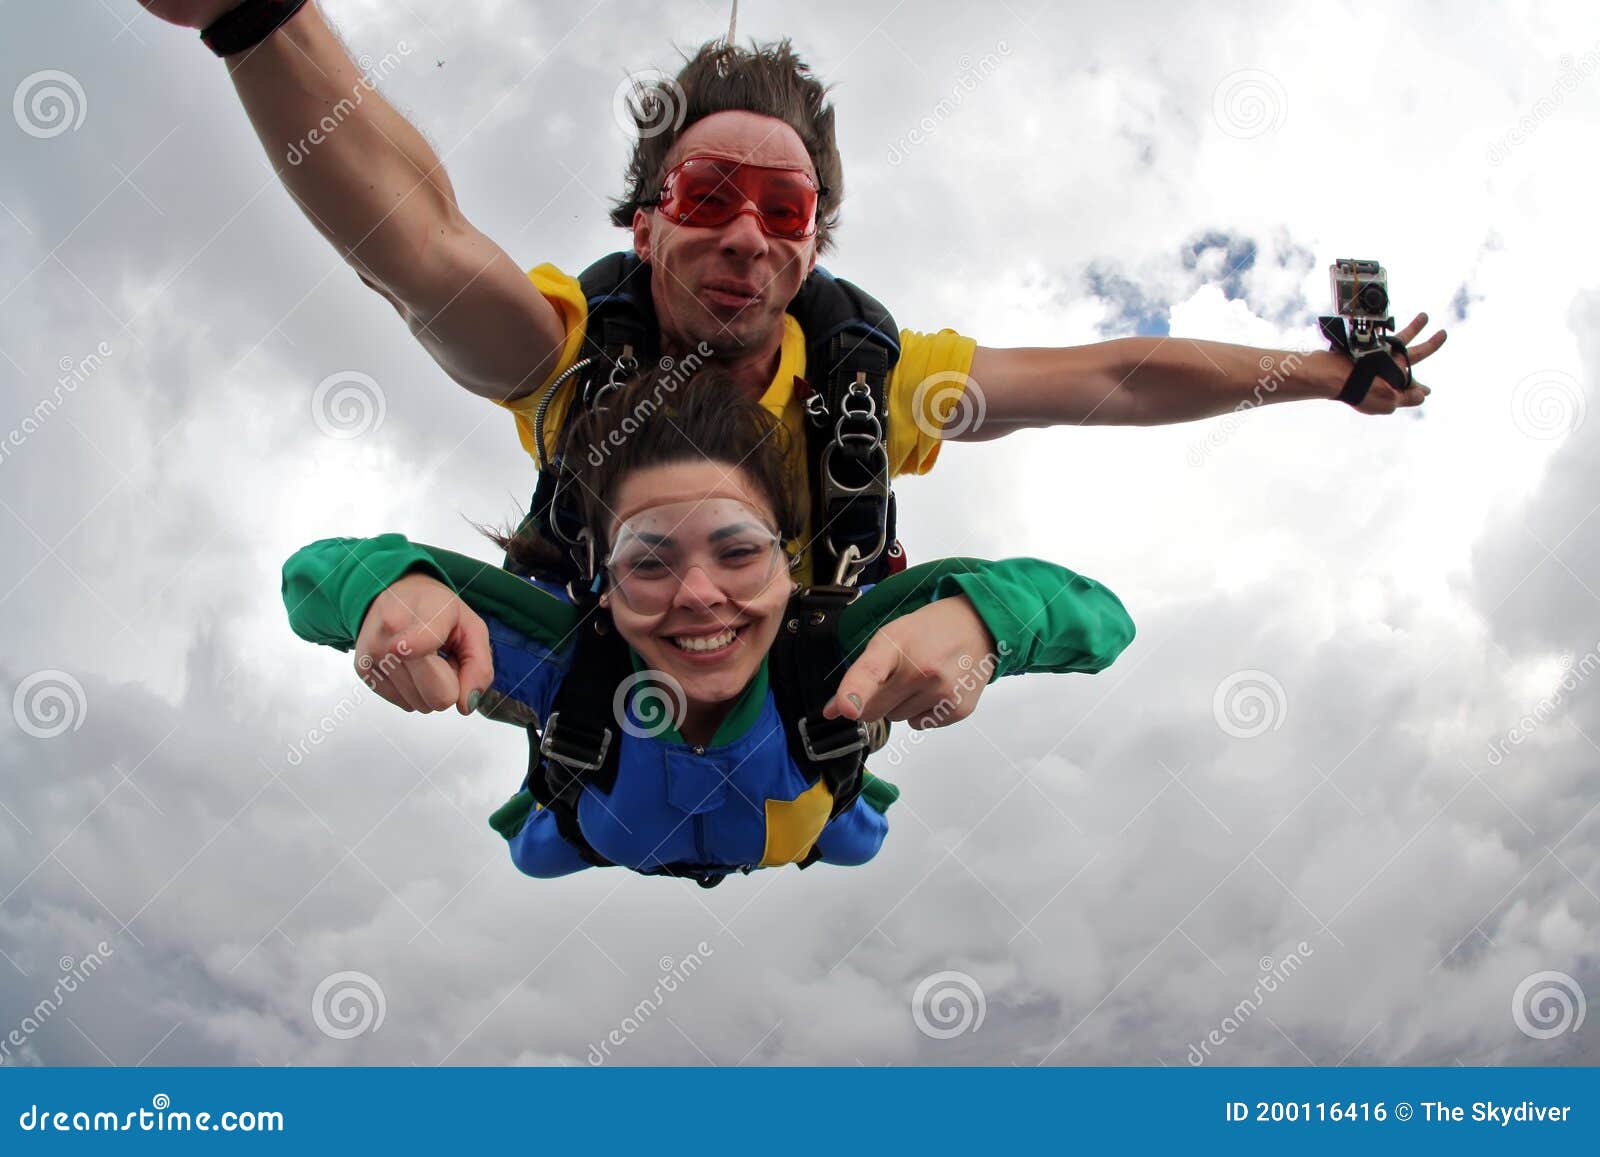 skydiving tandem having fun on a cloudy day.